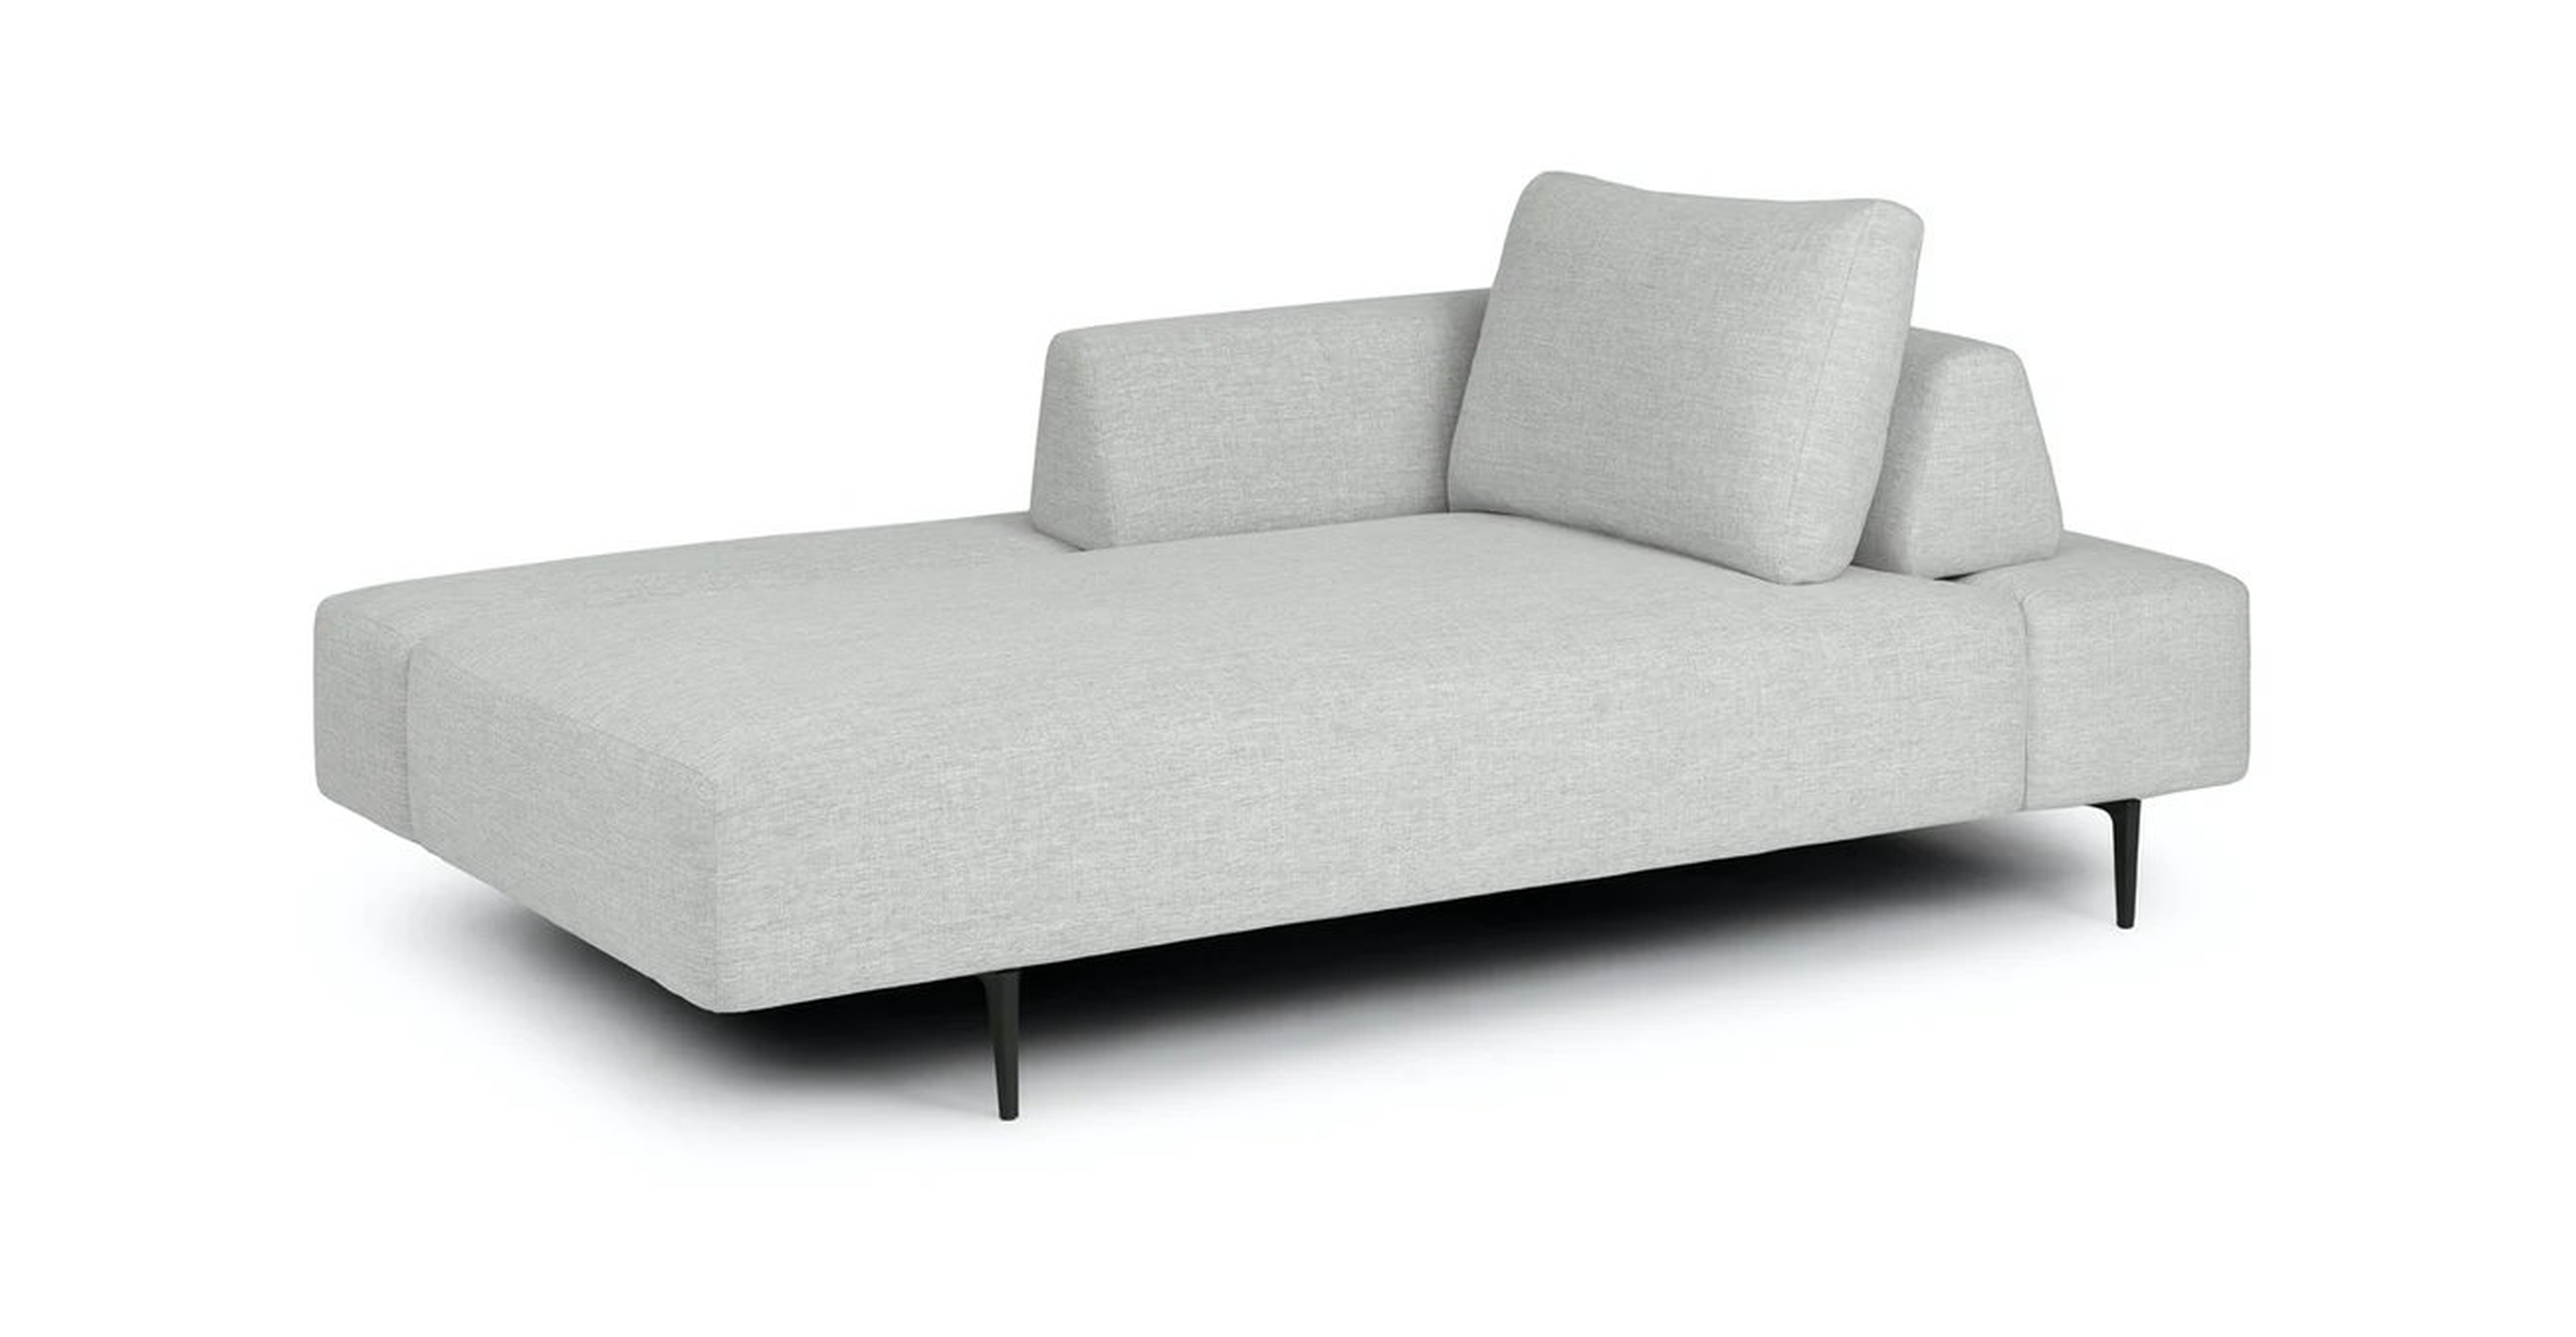 Divan Mist Gray Right Chaise Lounge - Article